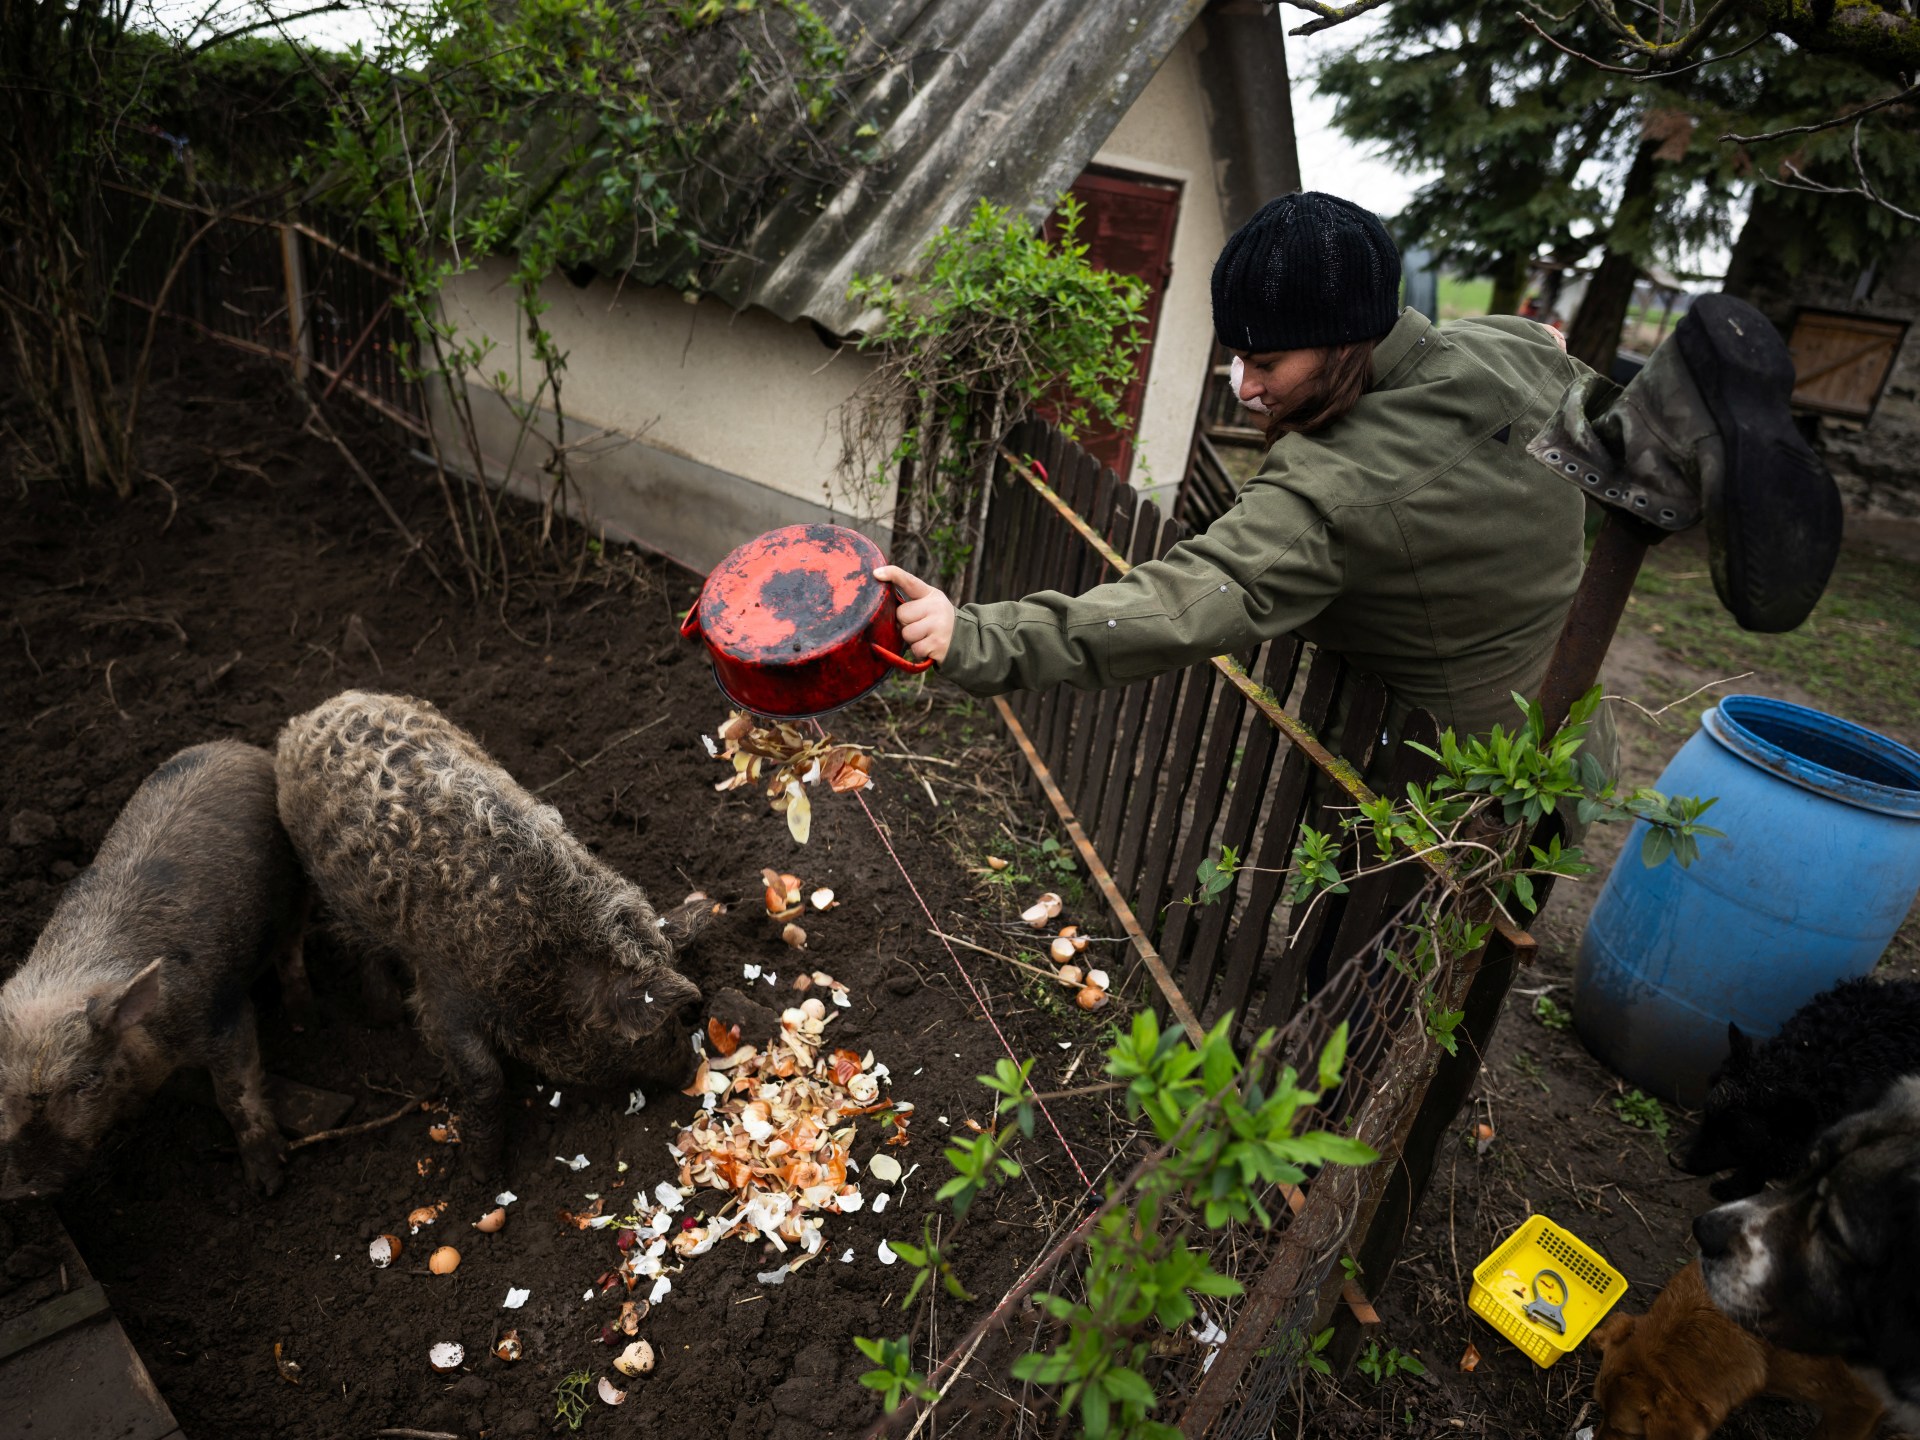 Sustainable living gives Hungarian families hope for the future